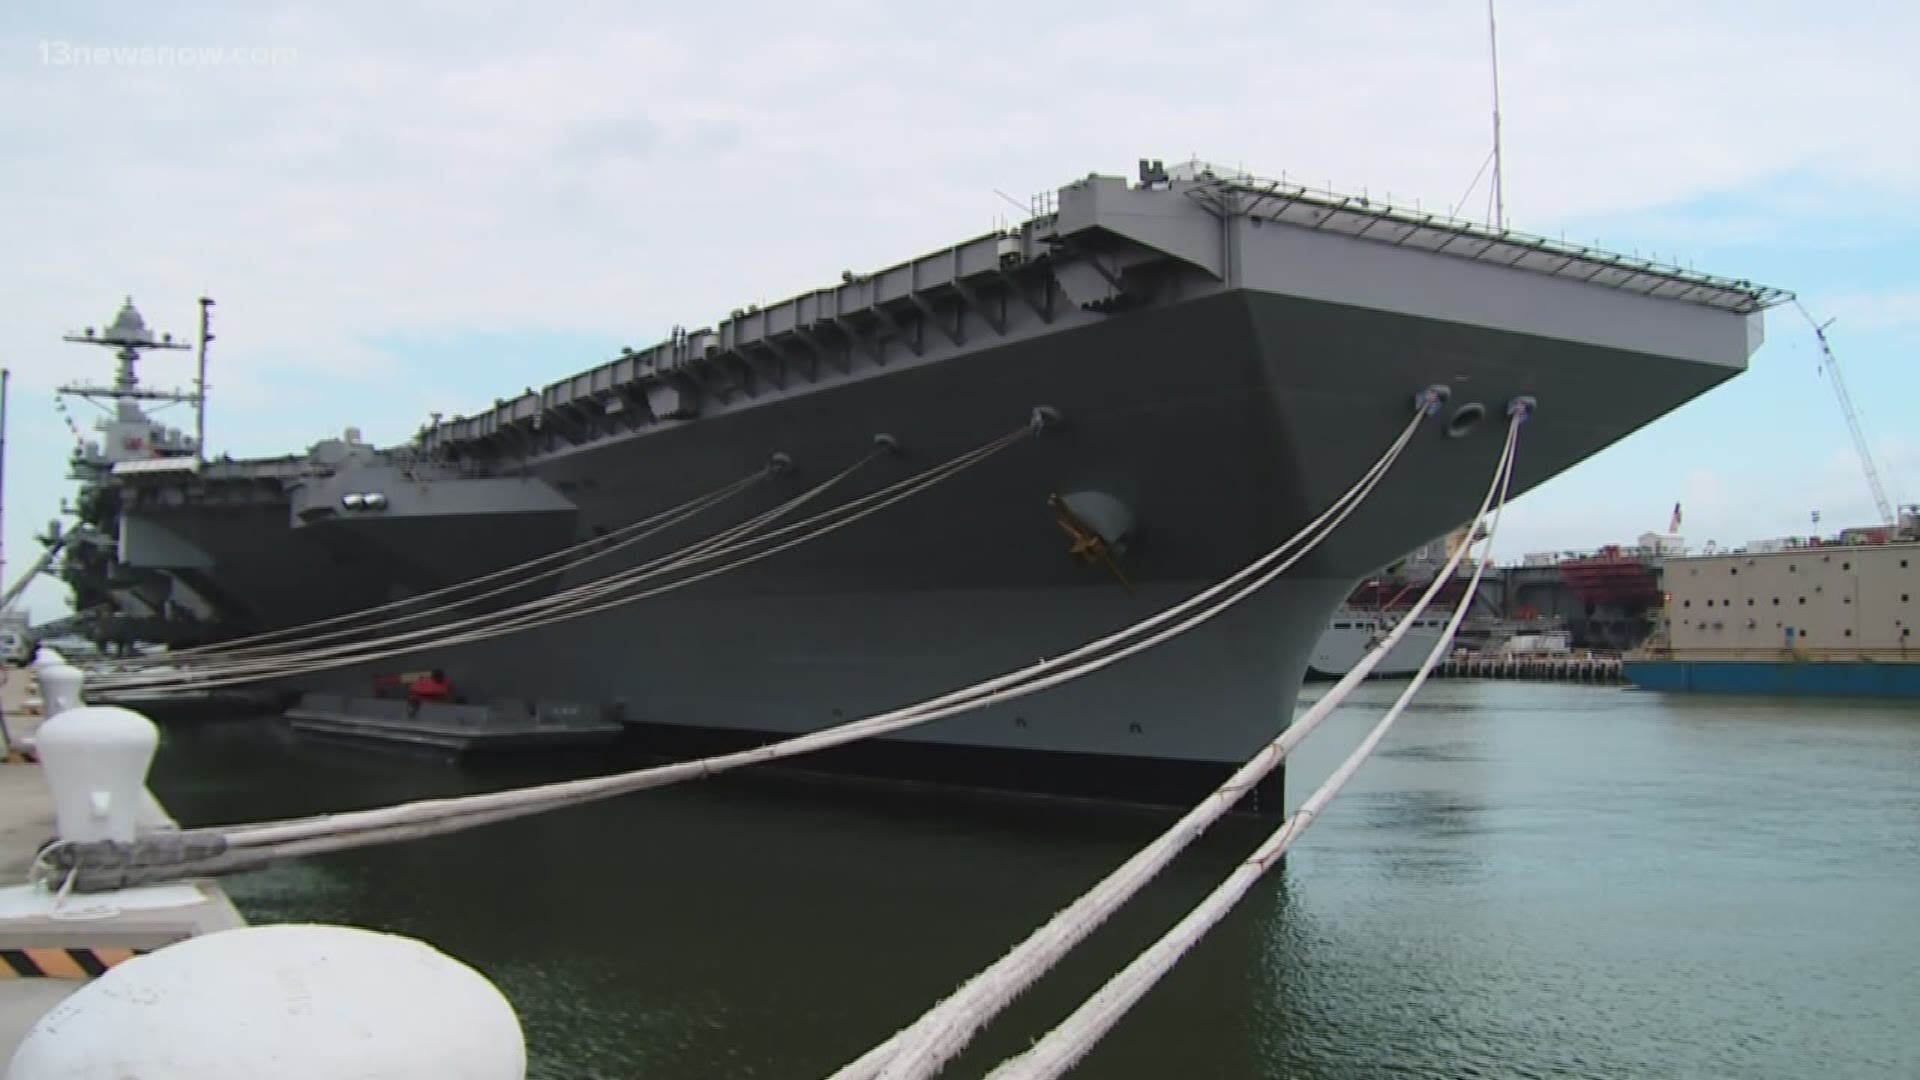 The work to improve and modernize USS Gerald R. Ford is worth nearly $700 million.